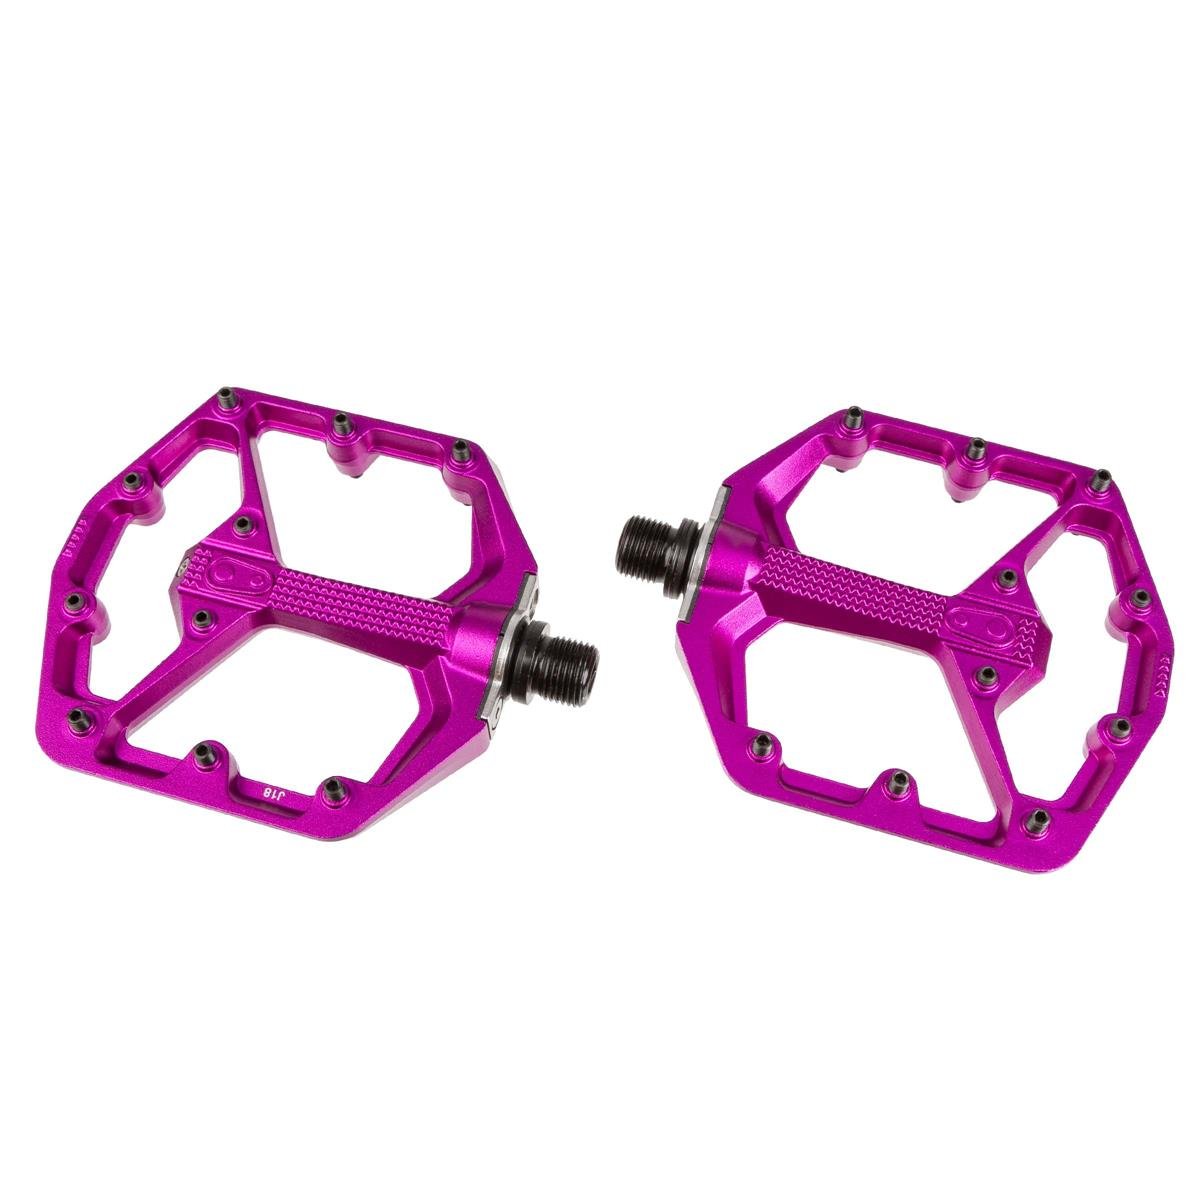 Crankbrothers Pedals Stamp 7 Limited Edition, Purple, Small